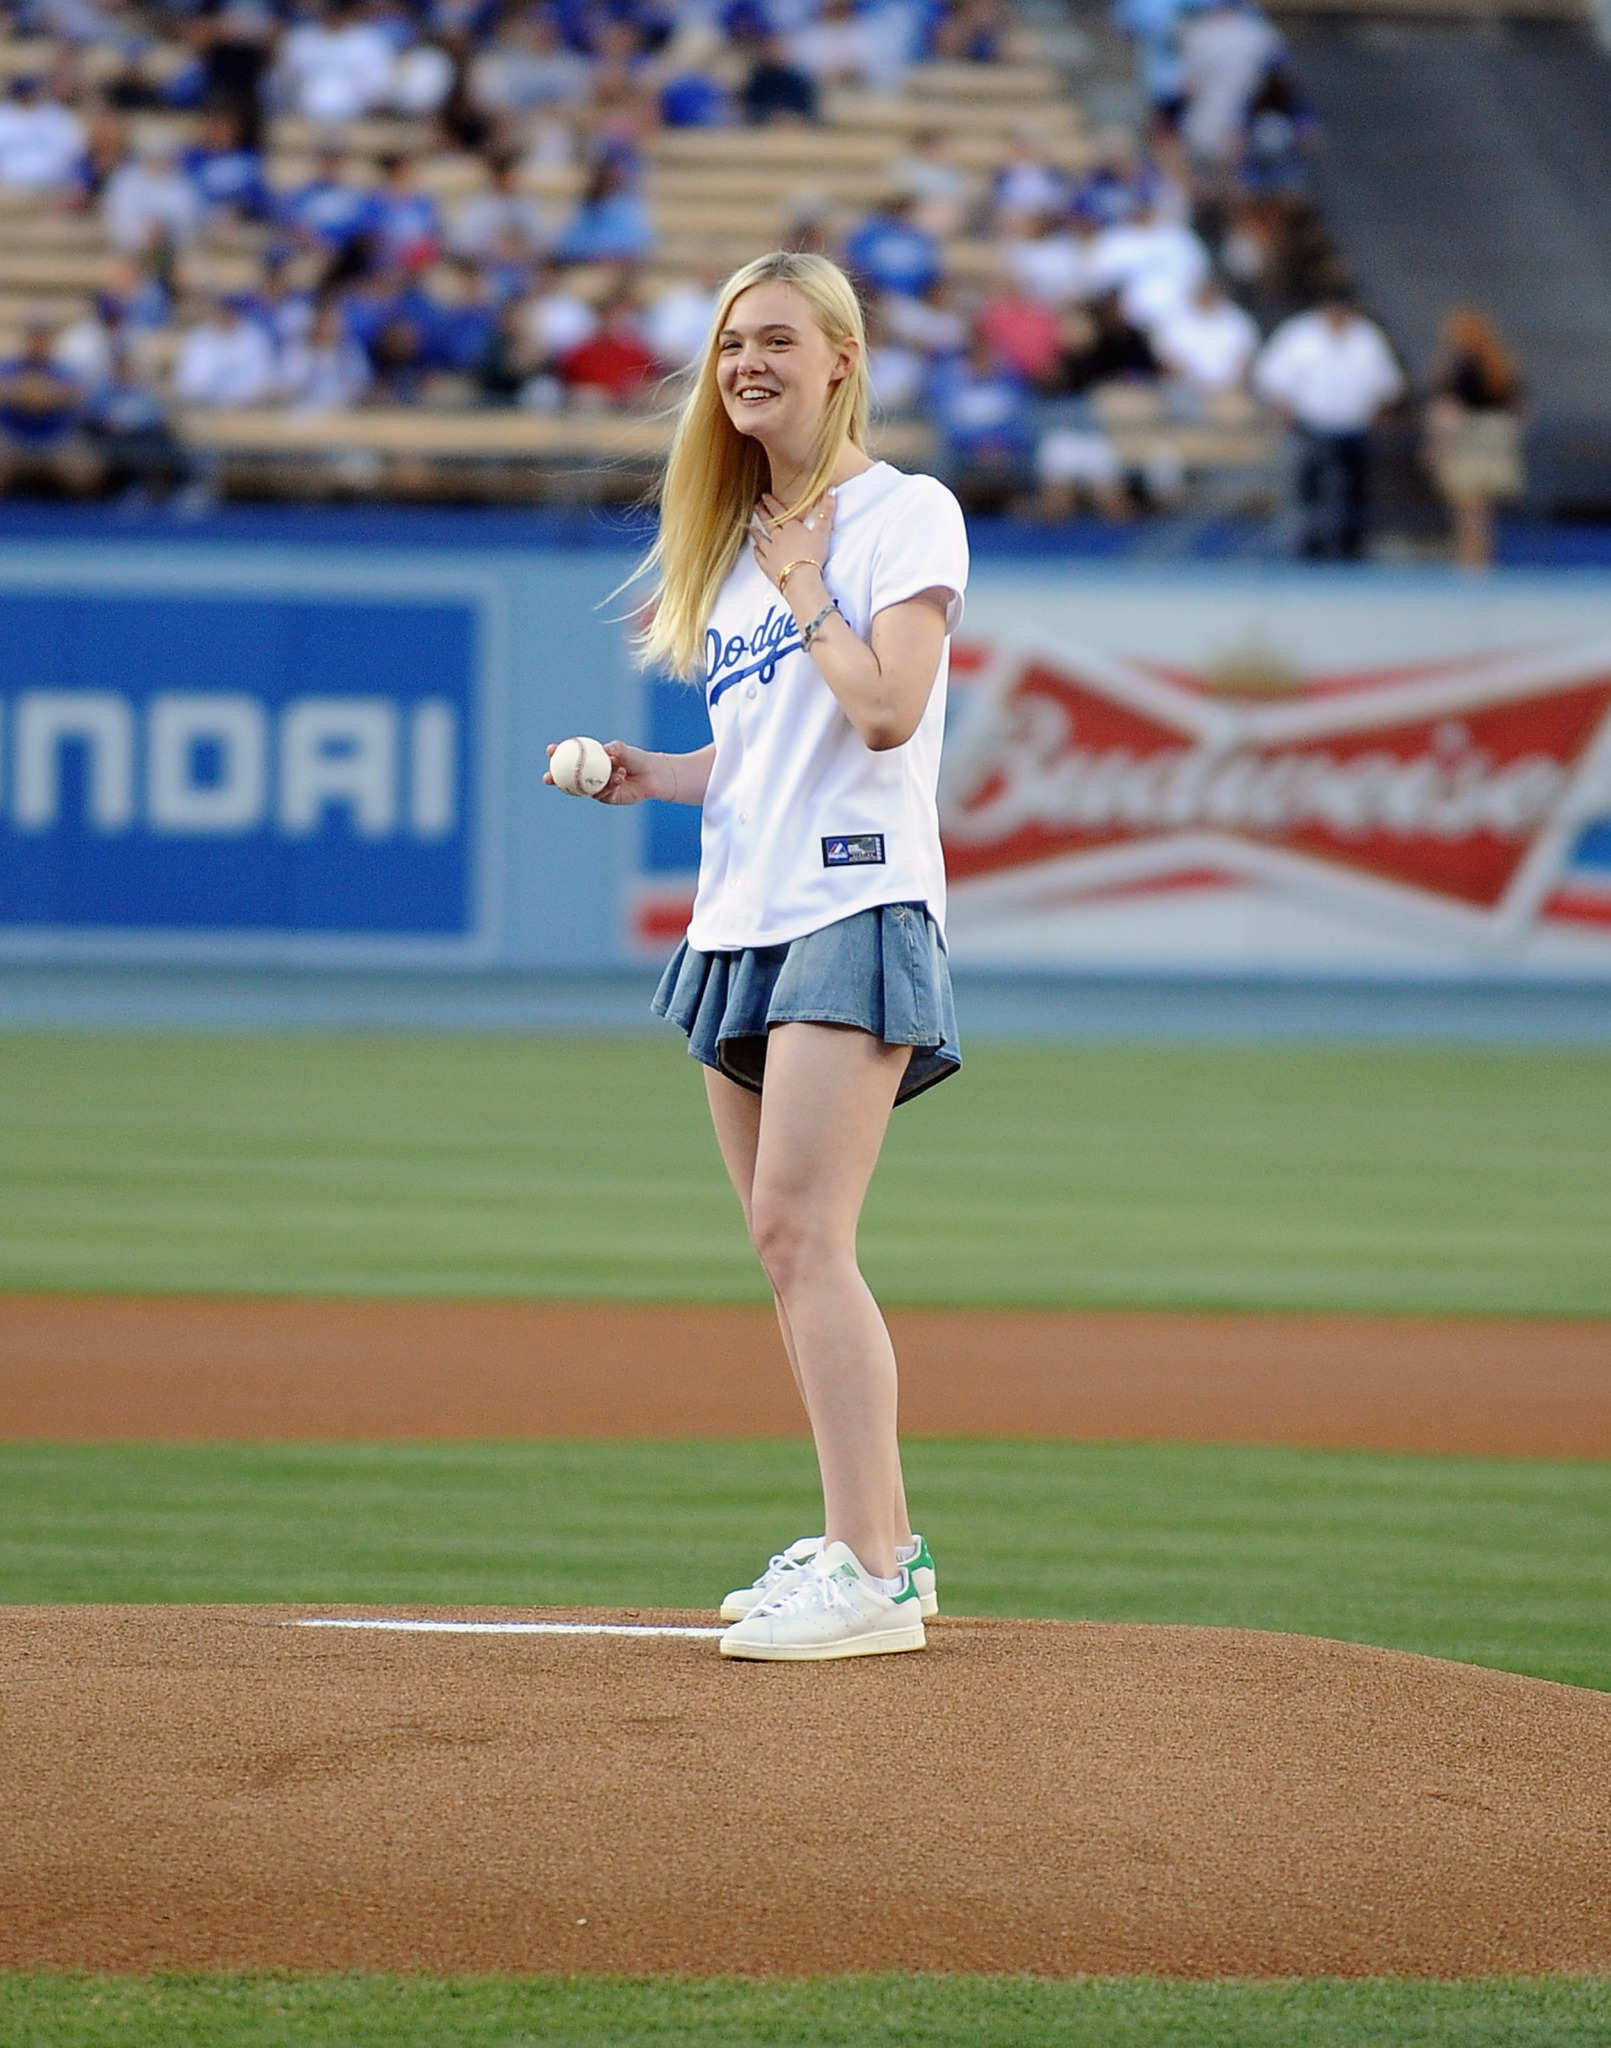 Actress Elle Fanning throws out the ceremonial first pitch before the game between the Chicago White Sox and Los Angeles Dodgers at Dodger Stadium on June 4, 2014 in Los Angeles, California.